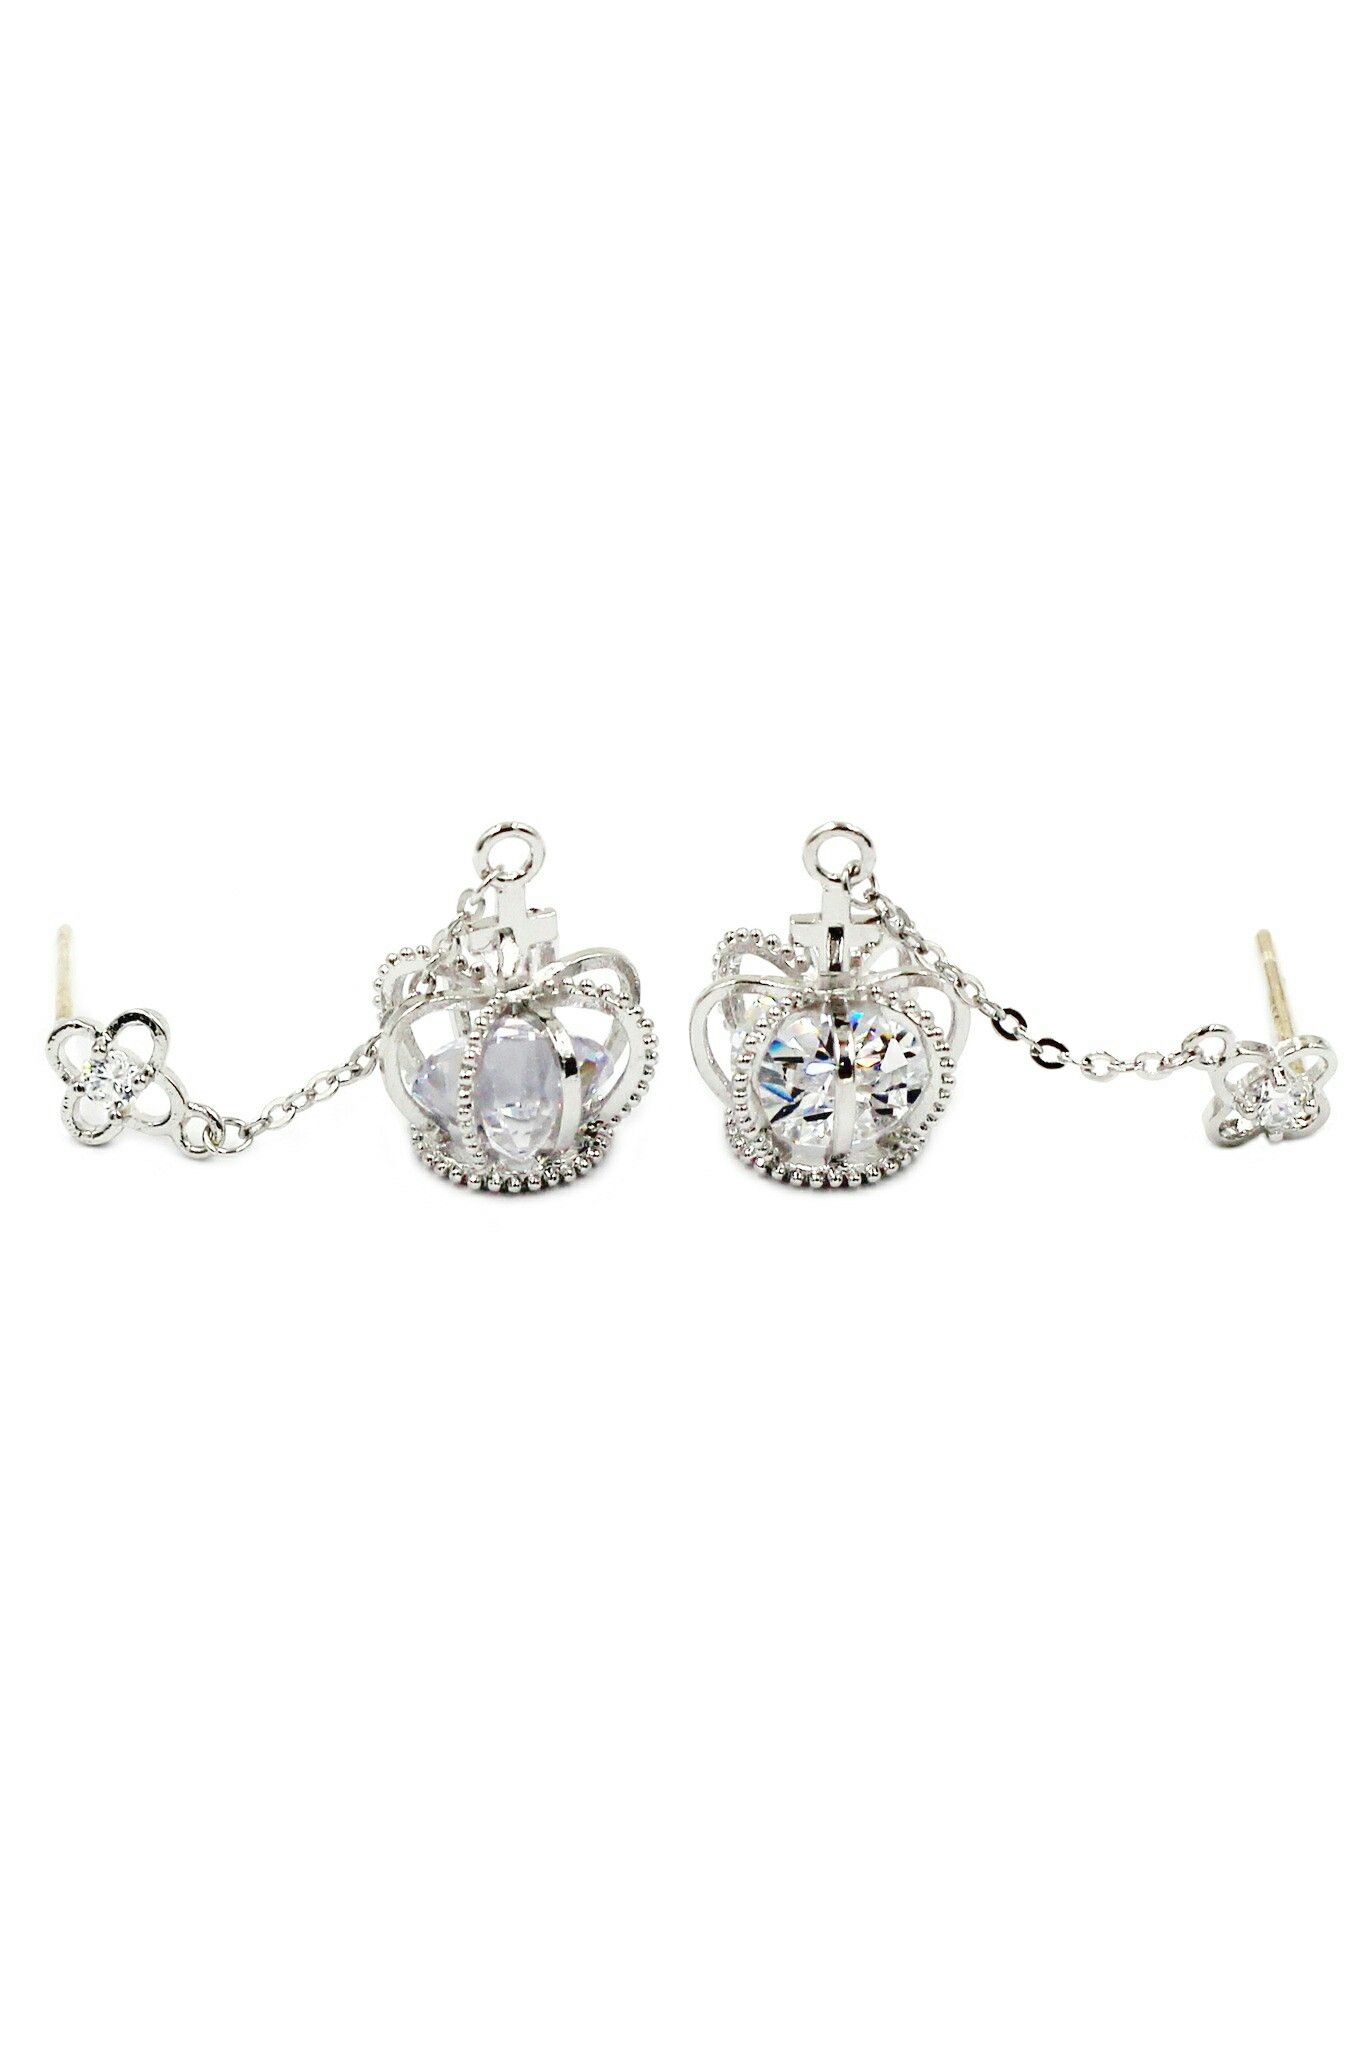 sets of Silver and gold crystal ring earrings necklace sets